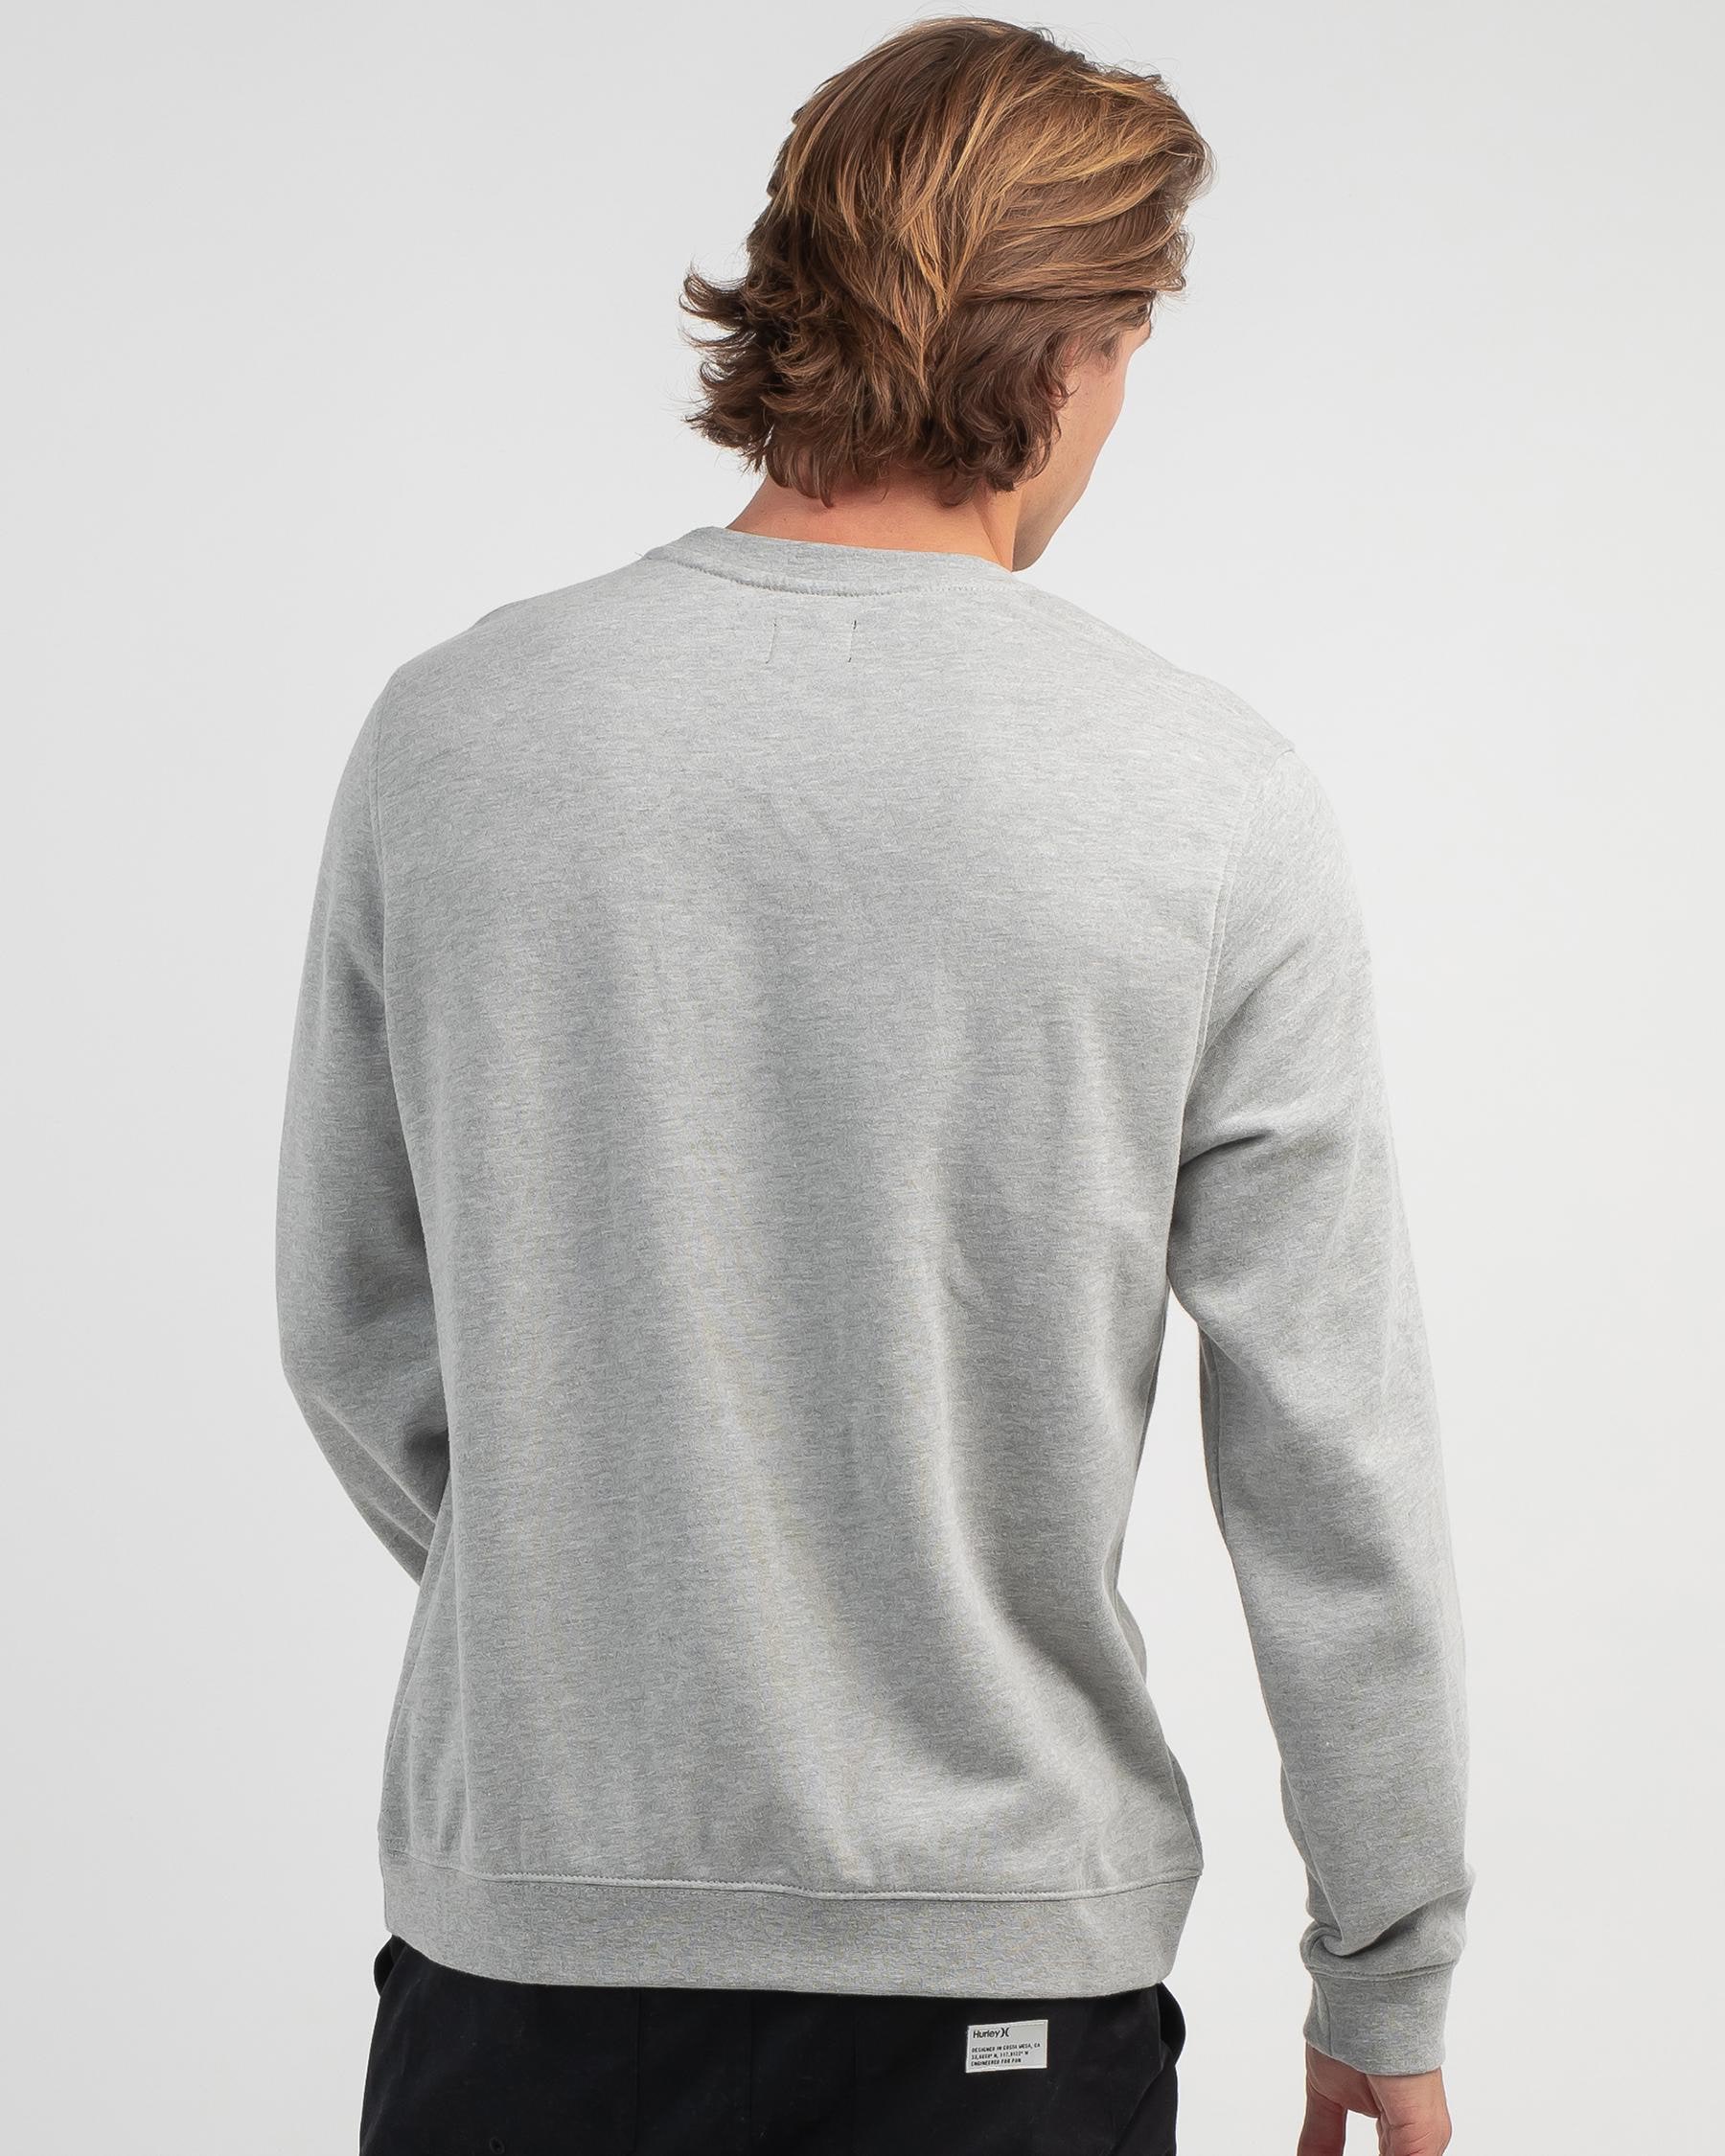 Hurley One And Only Solid Crew Sweatshirt In Dark Grey Heather - Fast ...